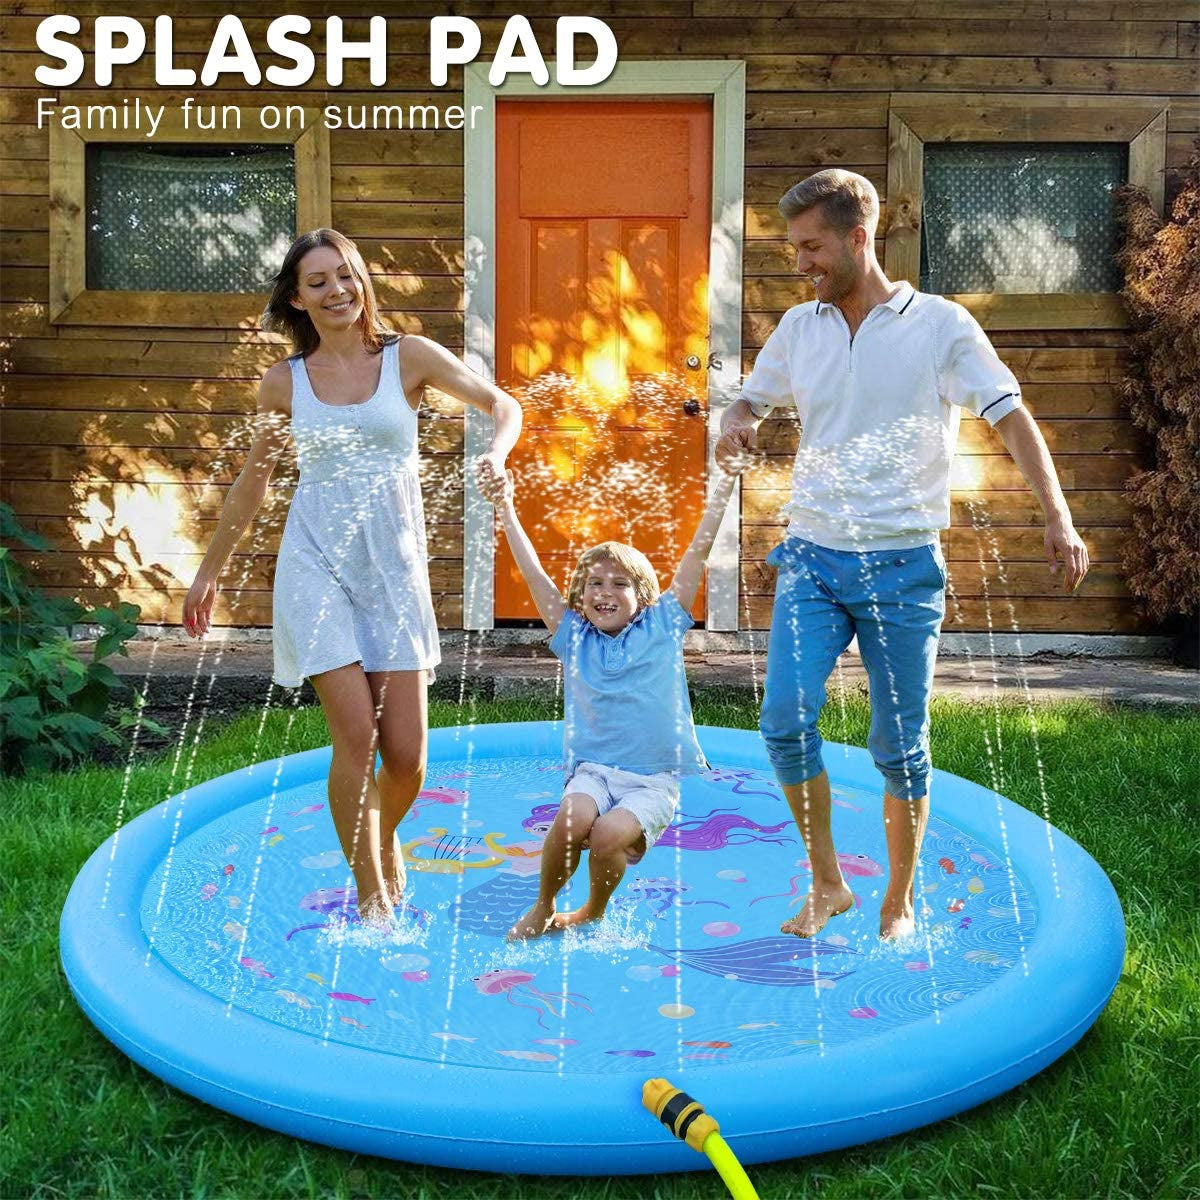 "3-in-1 Splash Pad Water Toy for Kids - Perfect Outdoor Gift for Toddlers and Babies!"